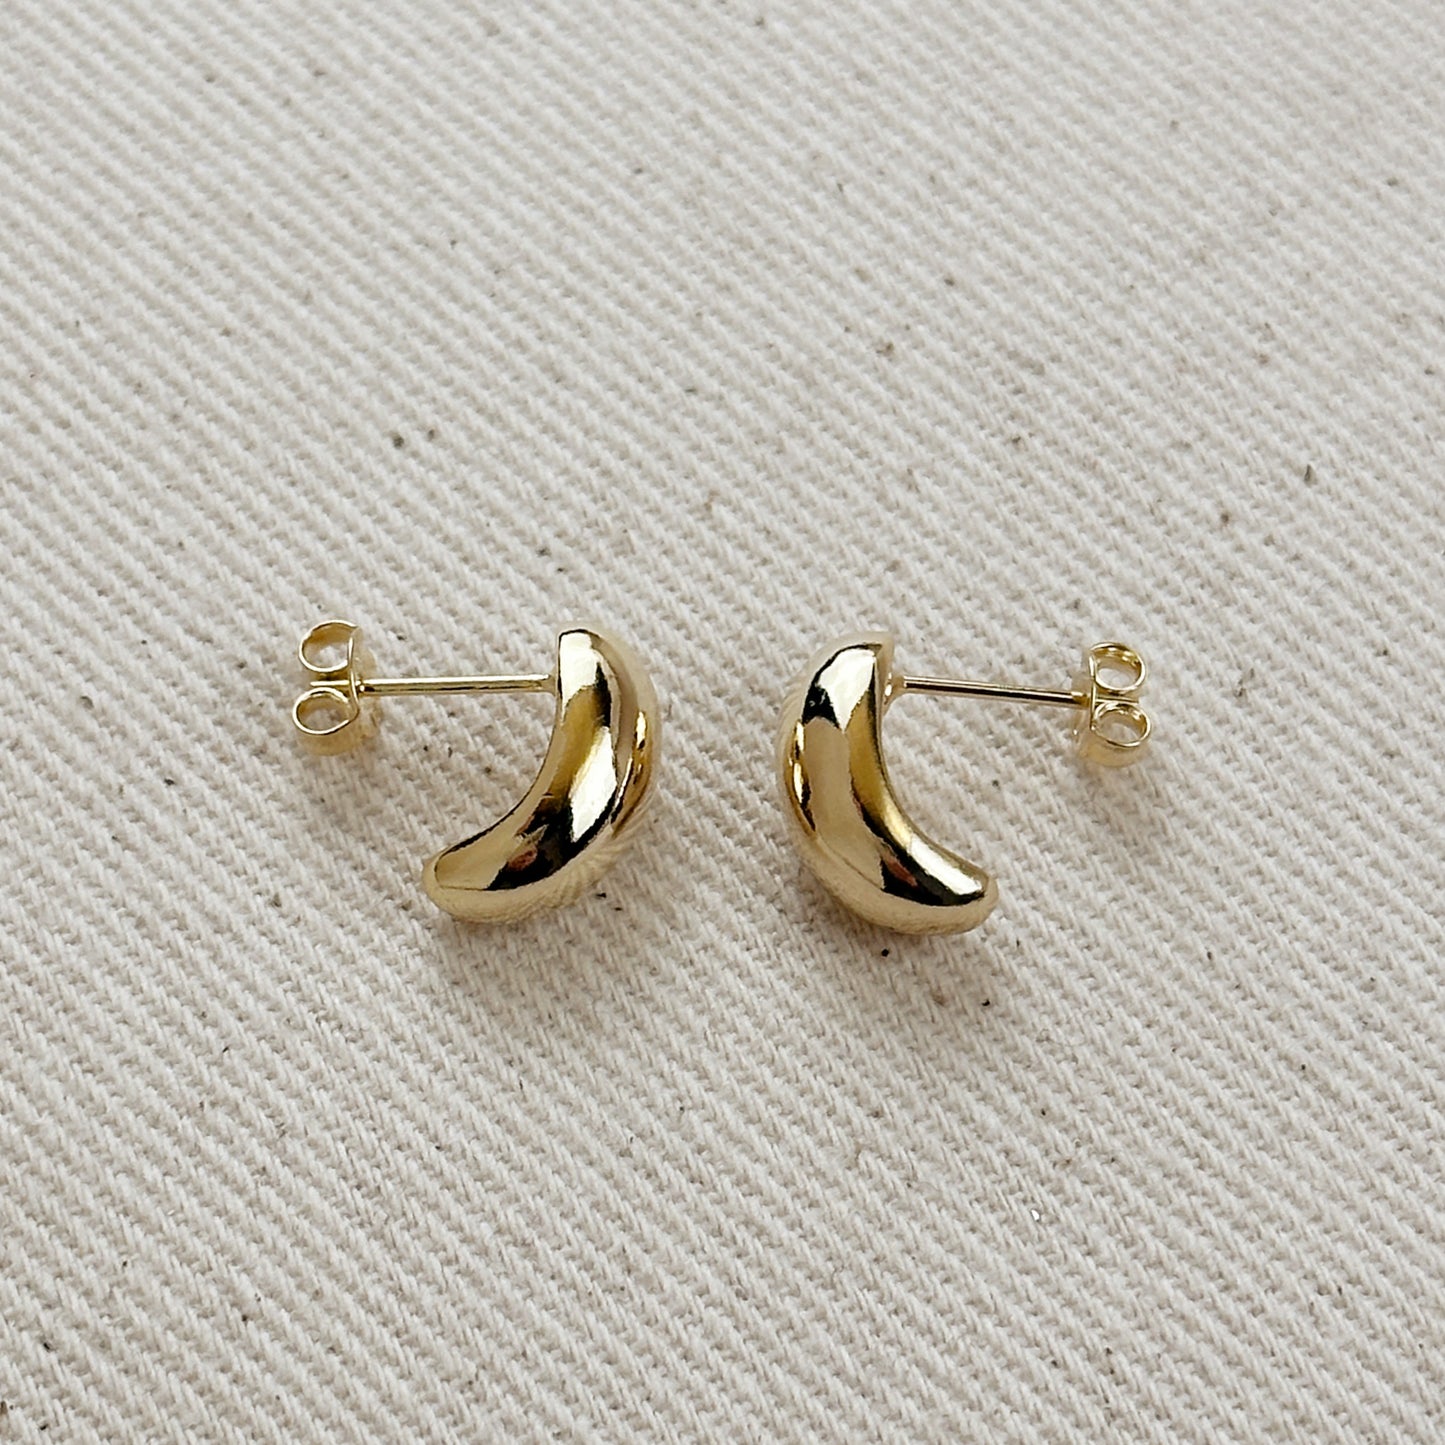 18k Gold Filled Polished Curved Small Stud Earrings